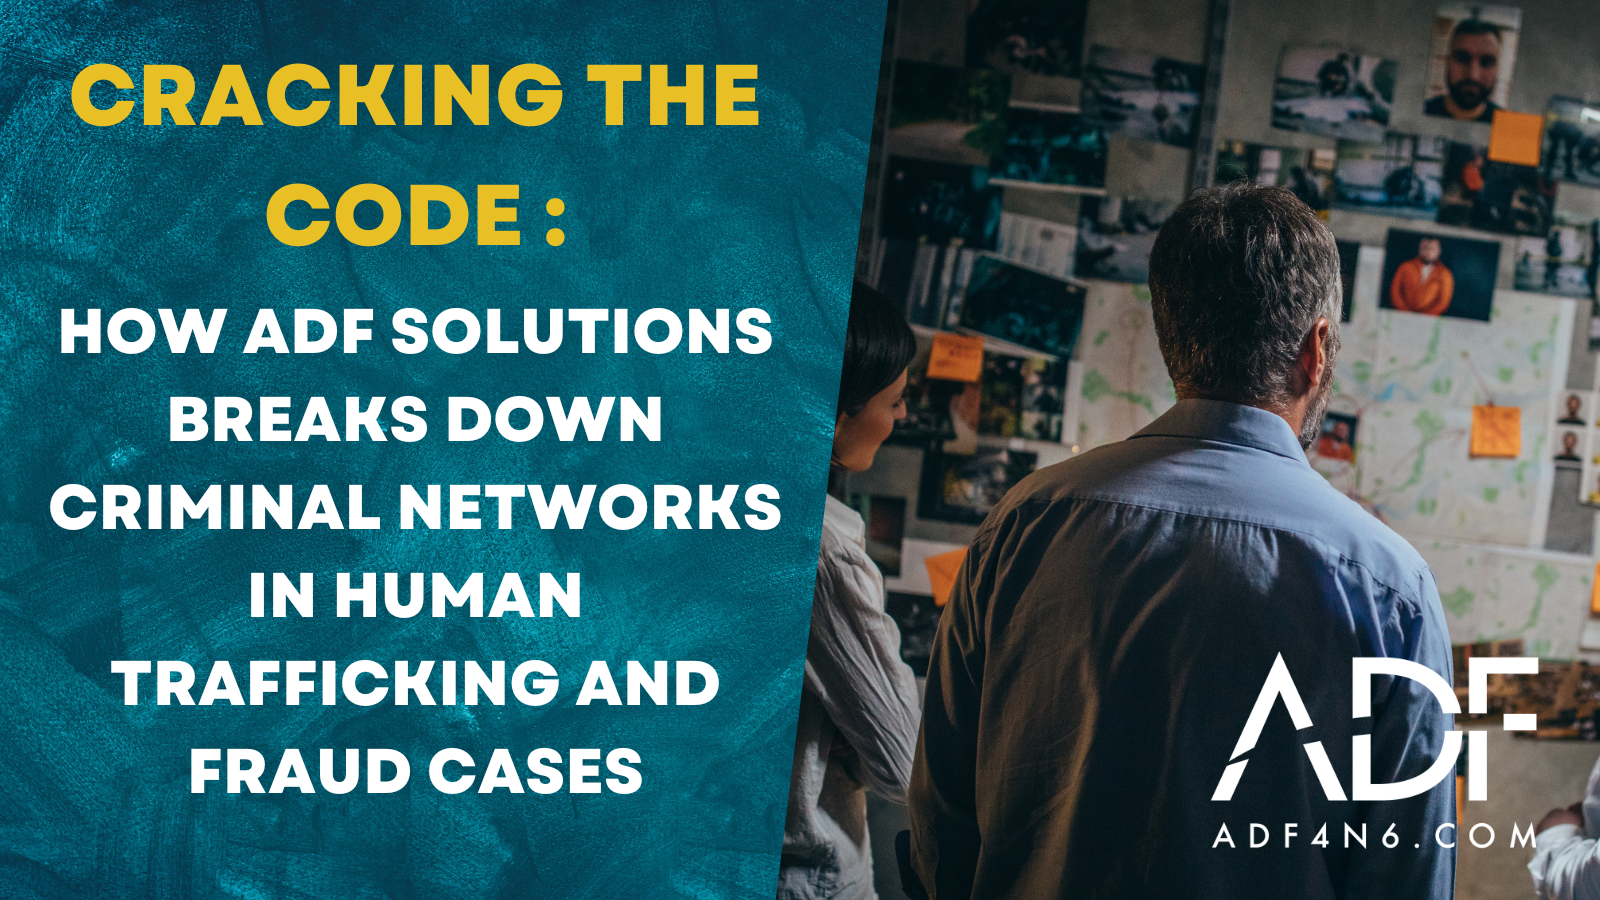 Cracking the Code: How ADF Solutions Breaks Down Criminal Networks in Human Trafficking and Fraud Cases